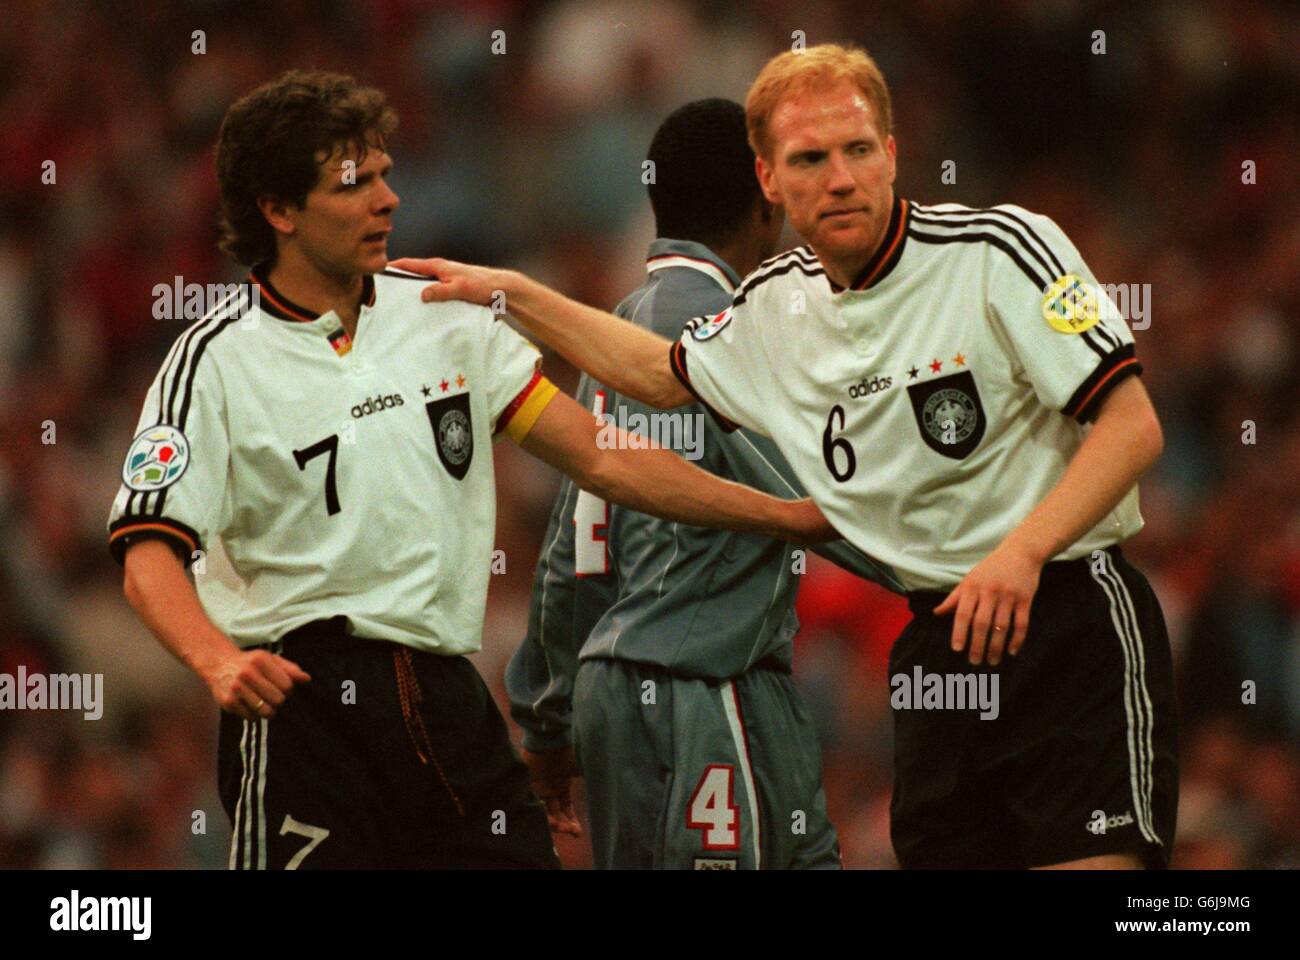 Football, demi-finale Euro 96. Angleterre contre Allemagne, Wembley.  Andreas Moller et Matthias Sammer, Allemagne Photo Stock - Alamy